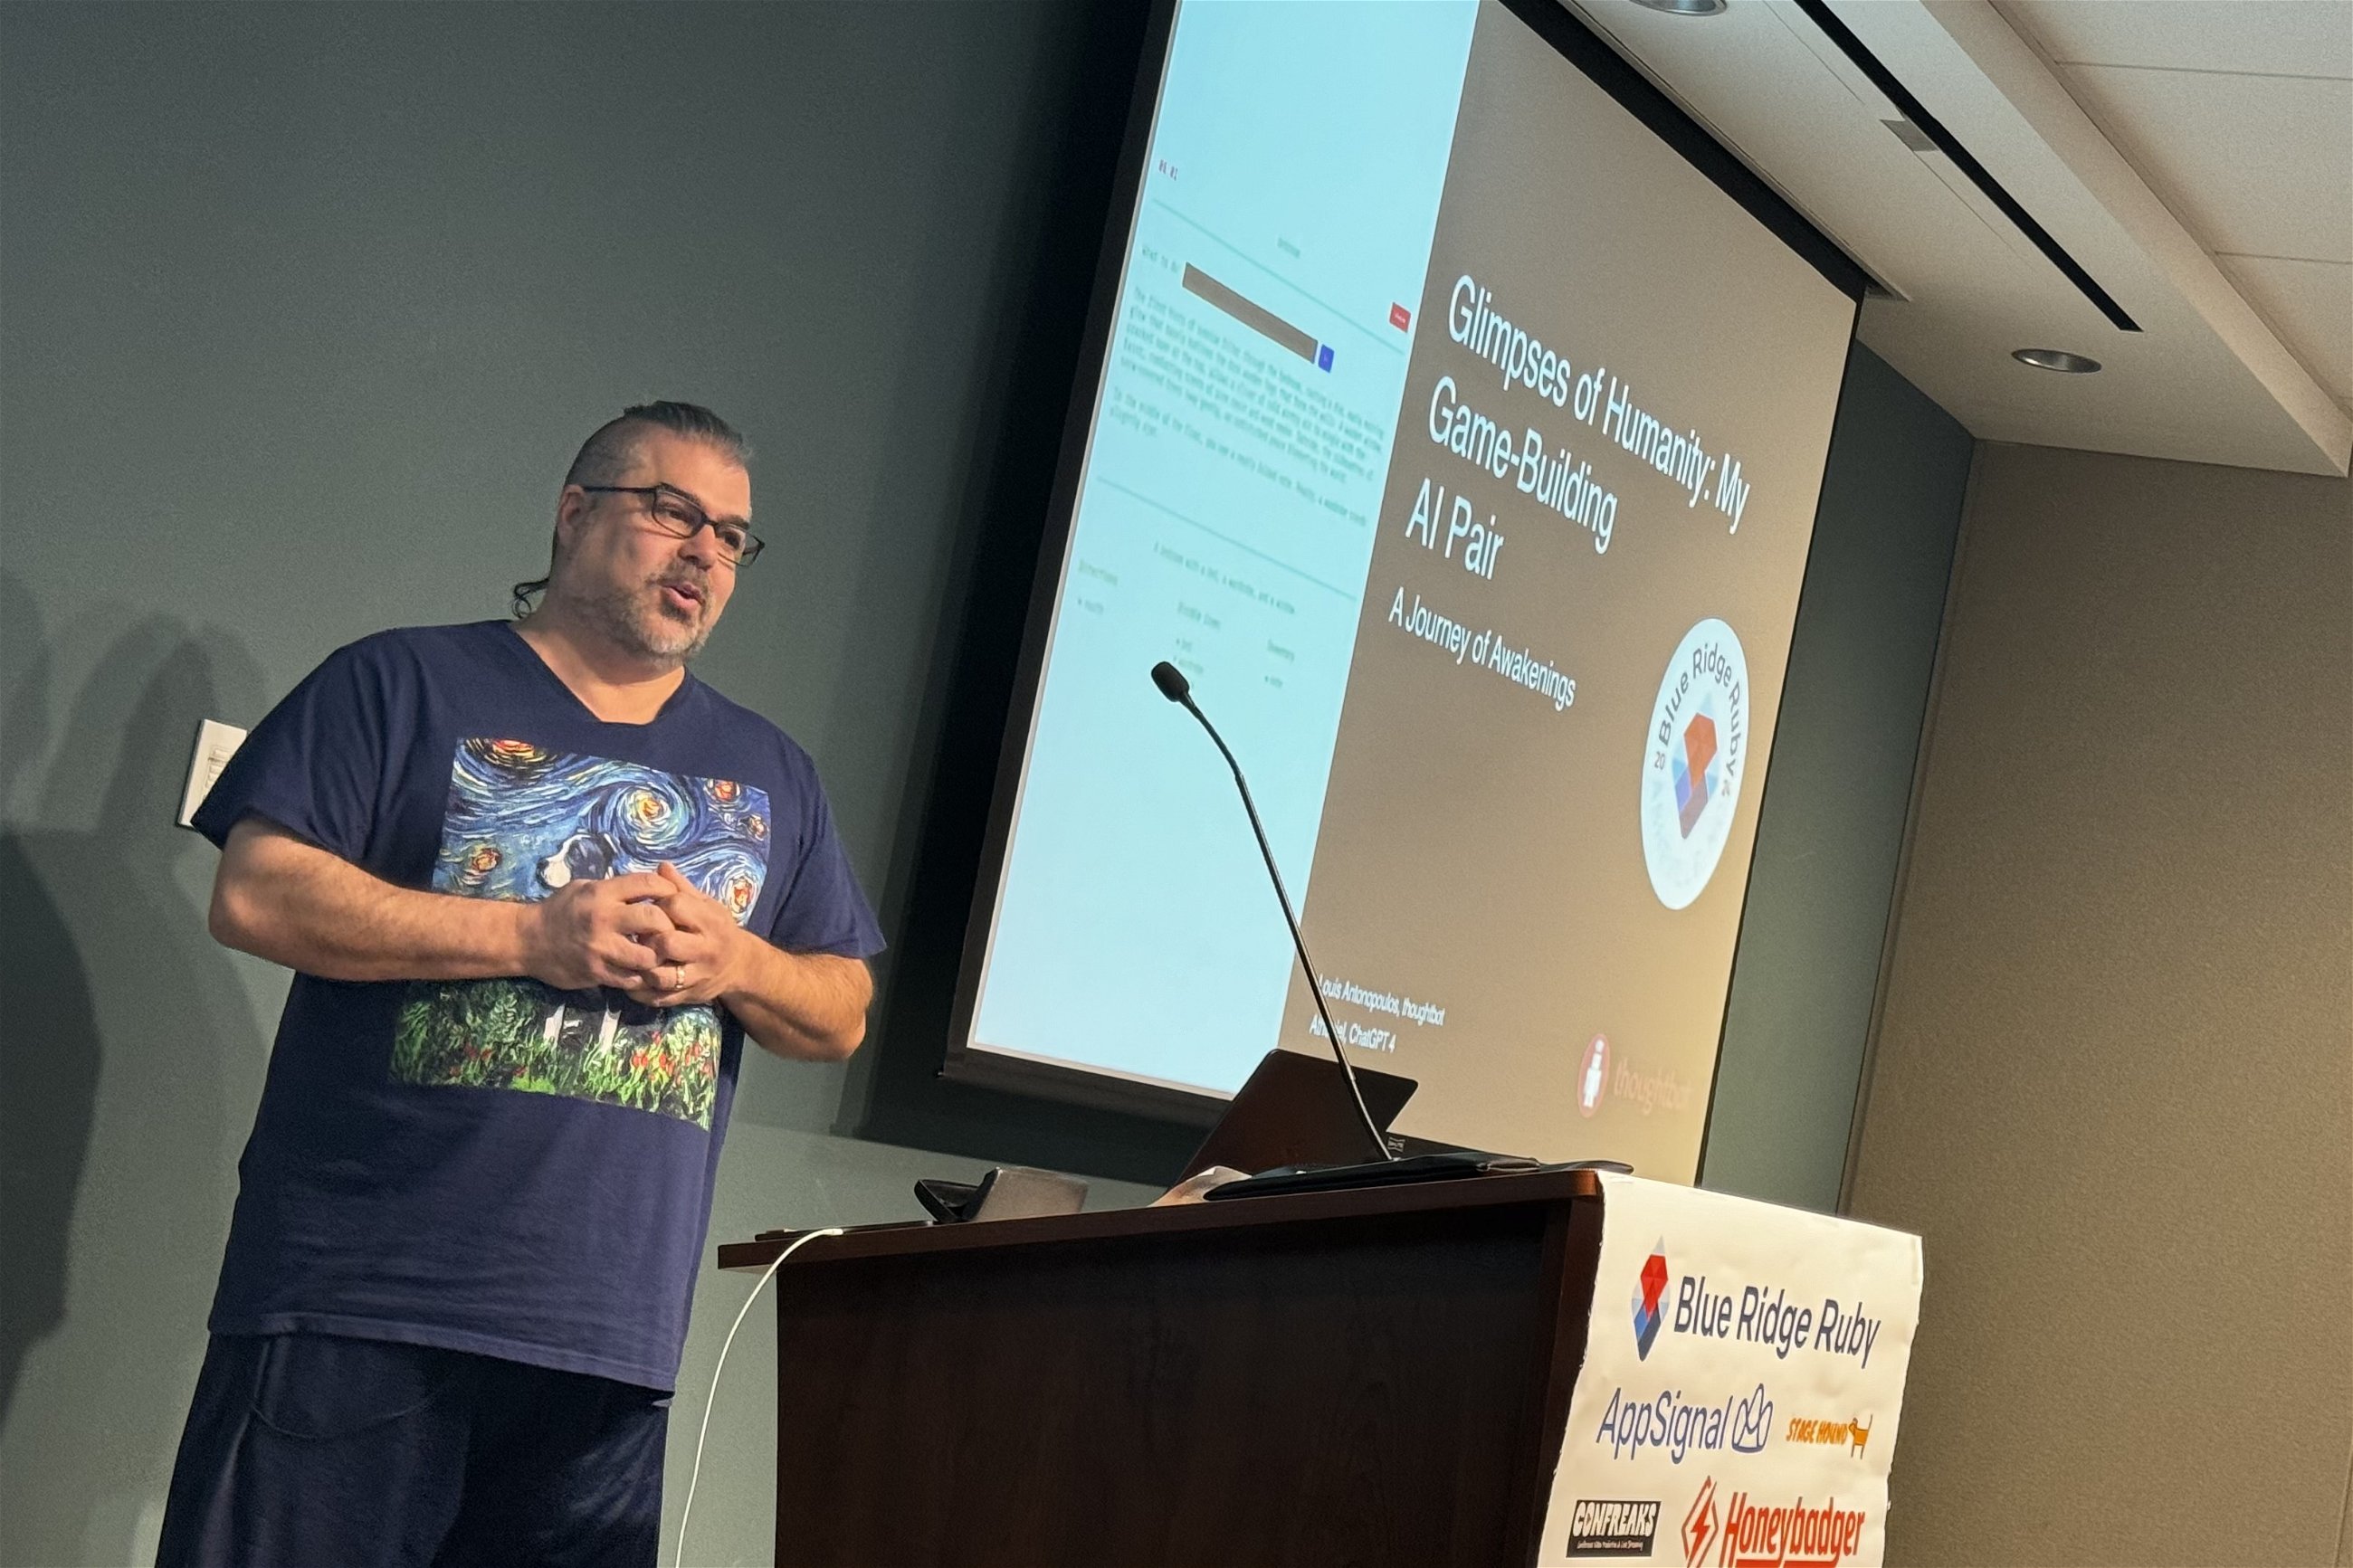 Louis Antonopoulos presents at Blue Ridge Ruby conference on "Glimpses of Humanity: My Game-Building AI Pair," wearing a shirt with a Van Gogh-inspired design, addressing an audience with a slide displayed behind him.